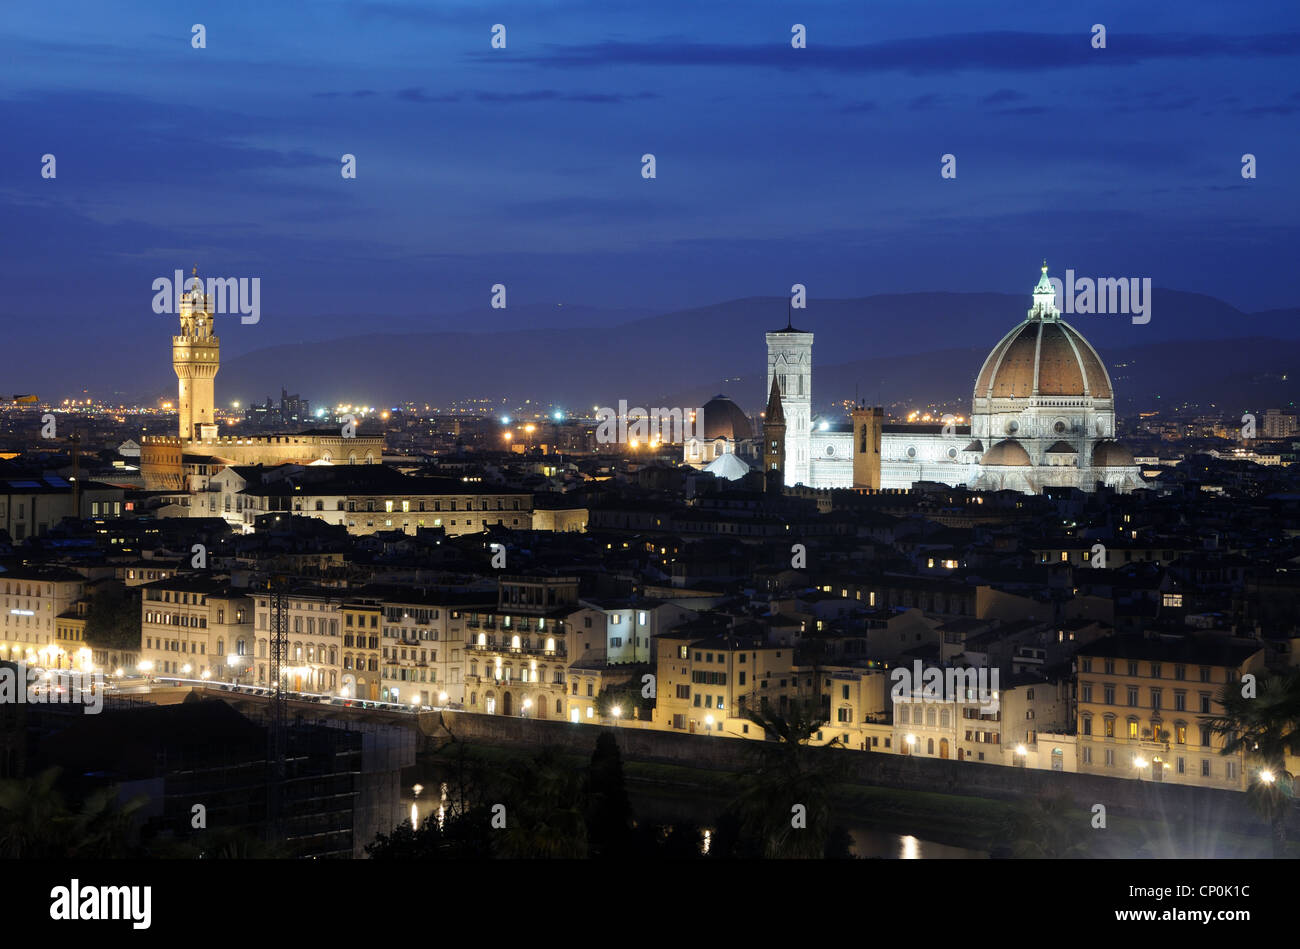 The Florentine skyline, including Florence Cathedral and the Palazzo Vecchio, at dusk, in Florence, Tuscany, Italy Stock Photo